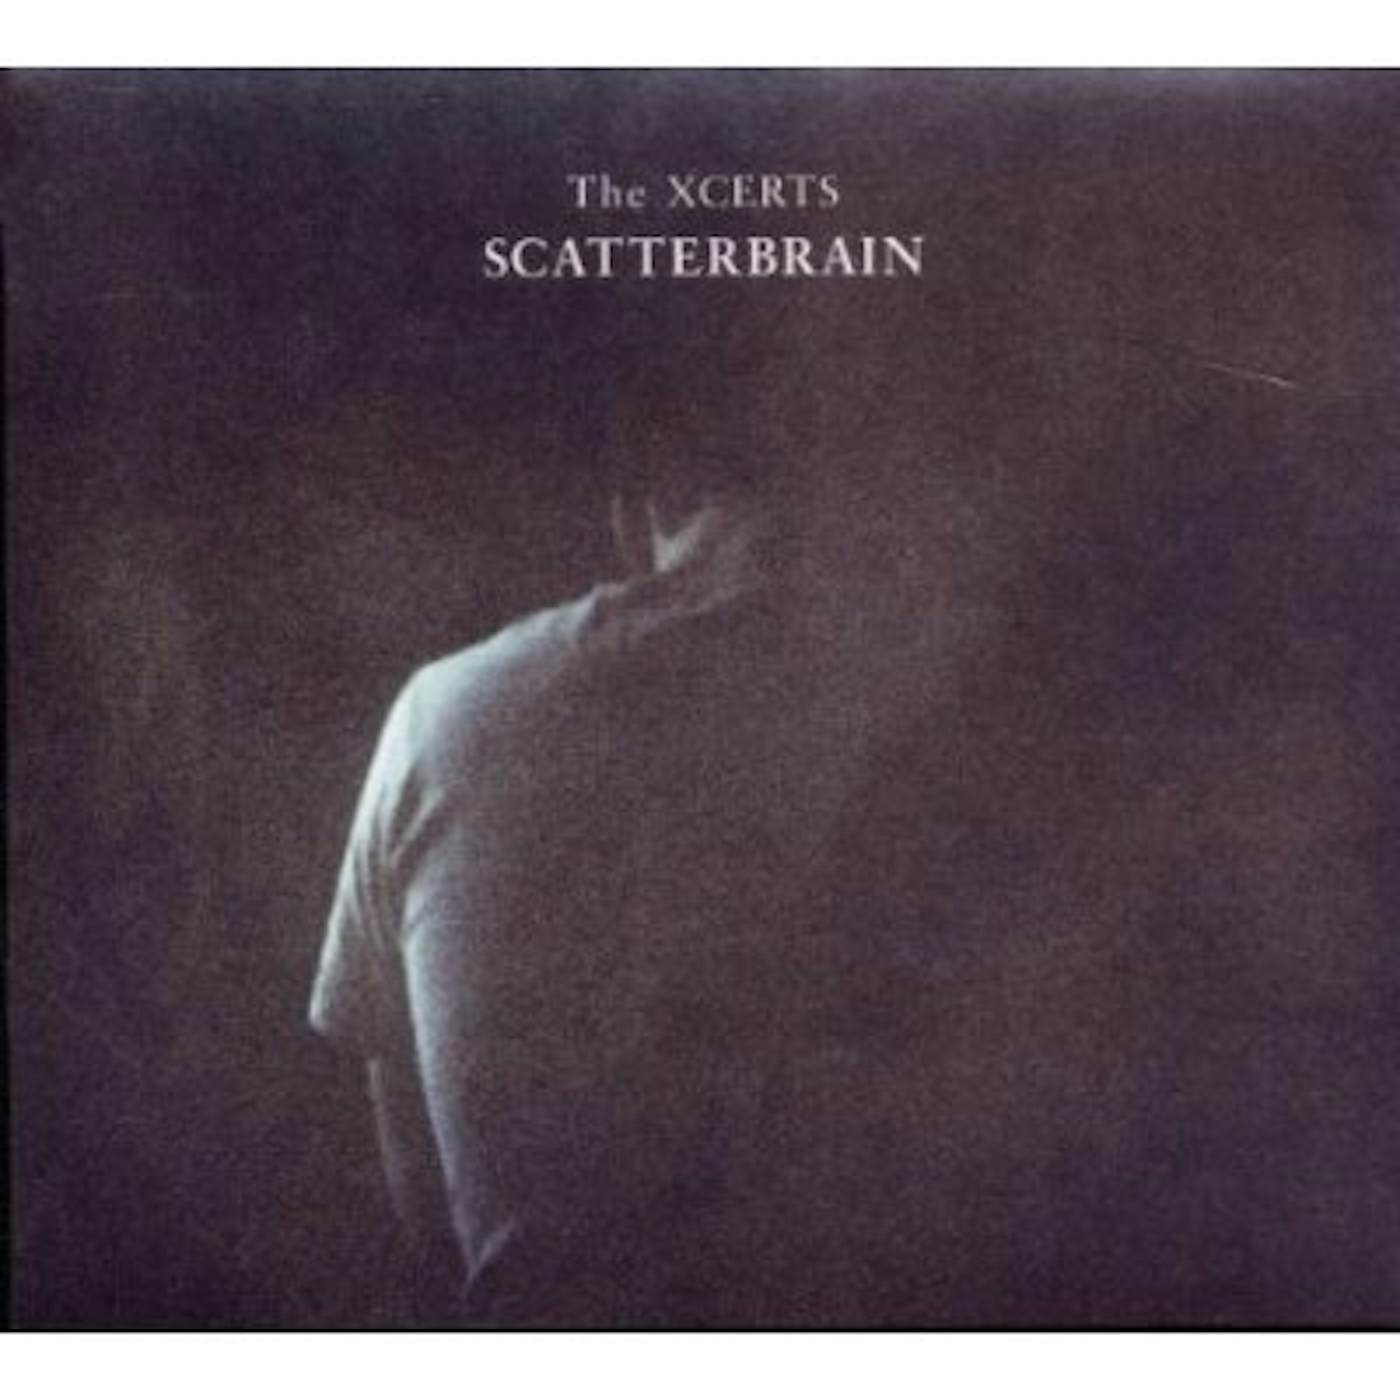 The XCERTS SCATTERBRAIN CD